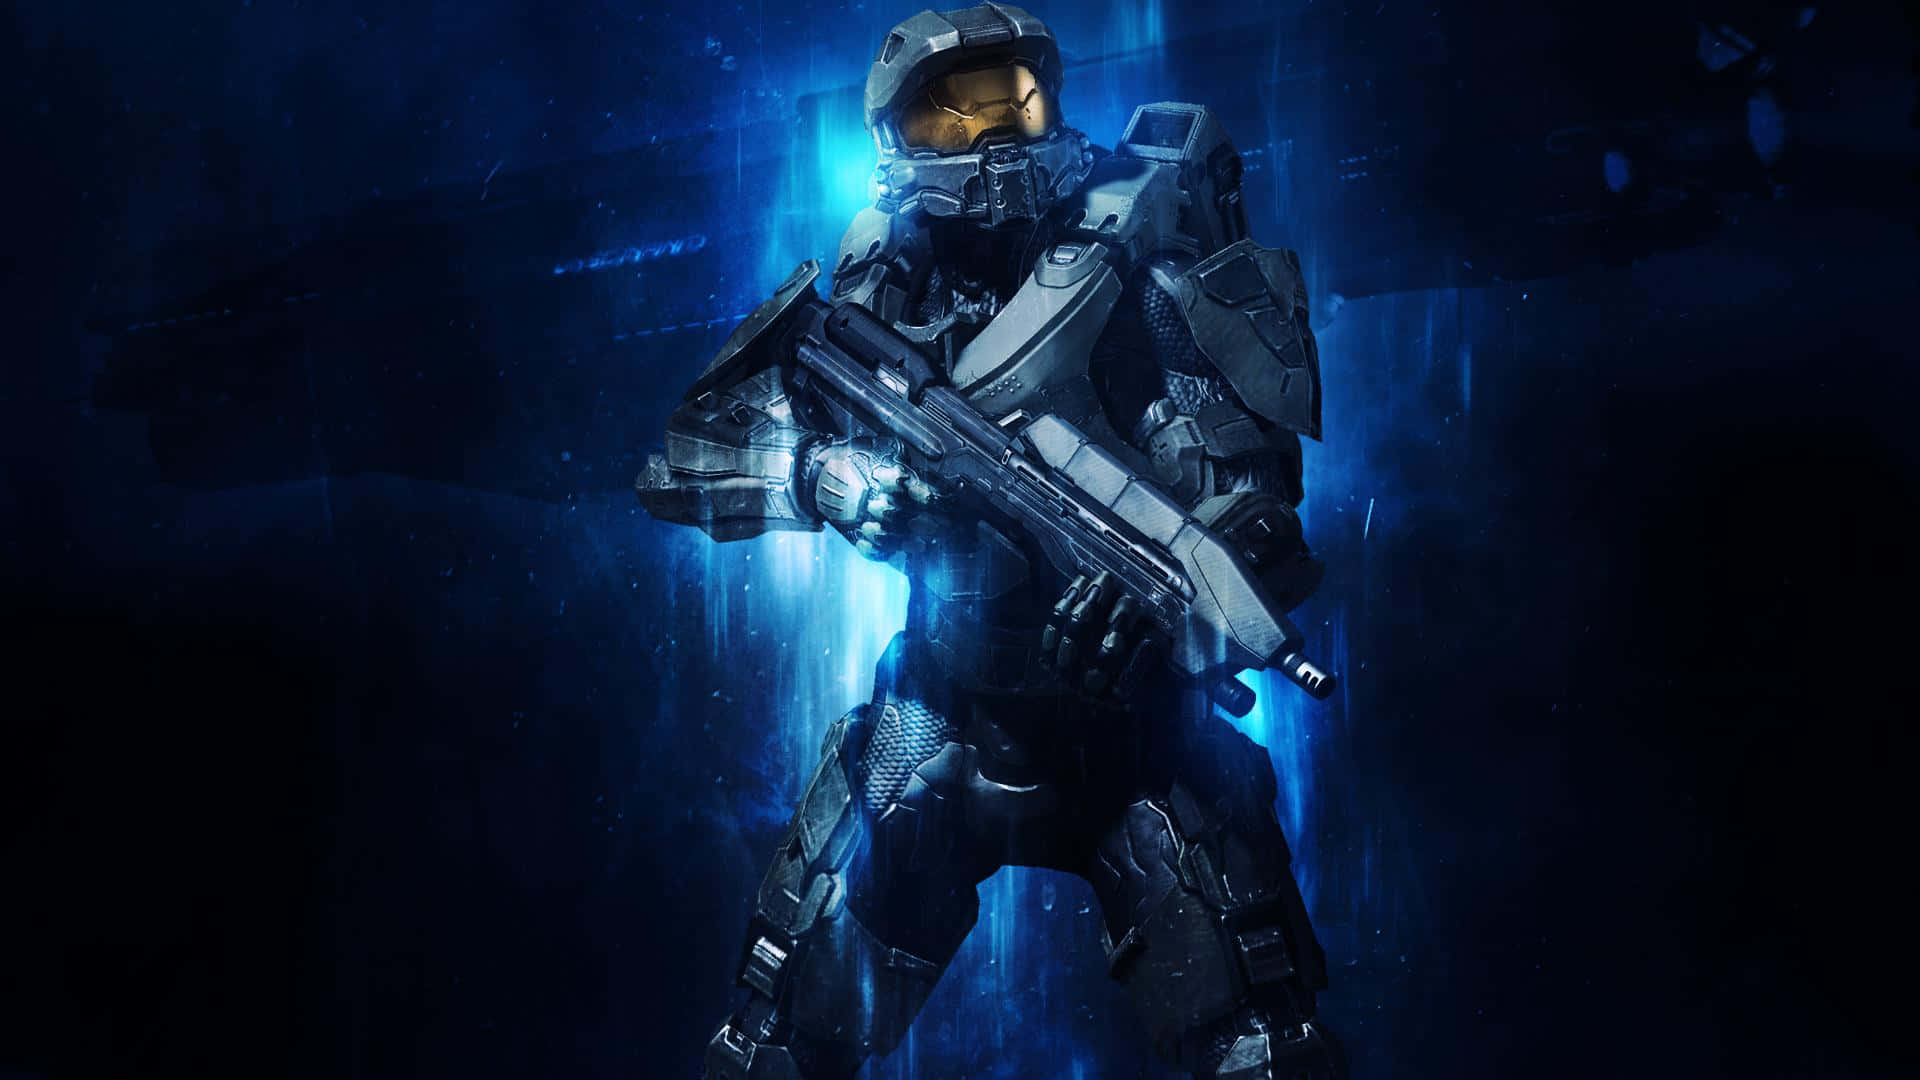 Cool Halo In Blue Wallpaper